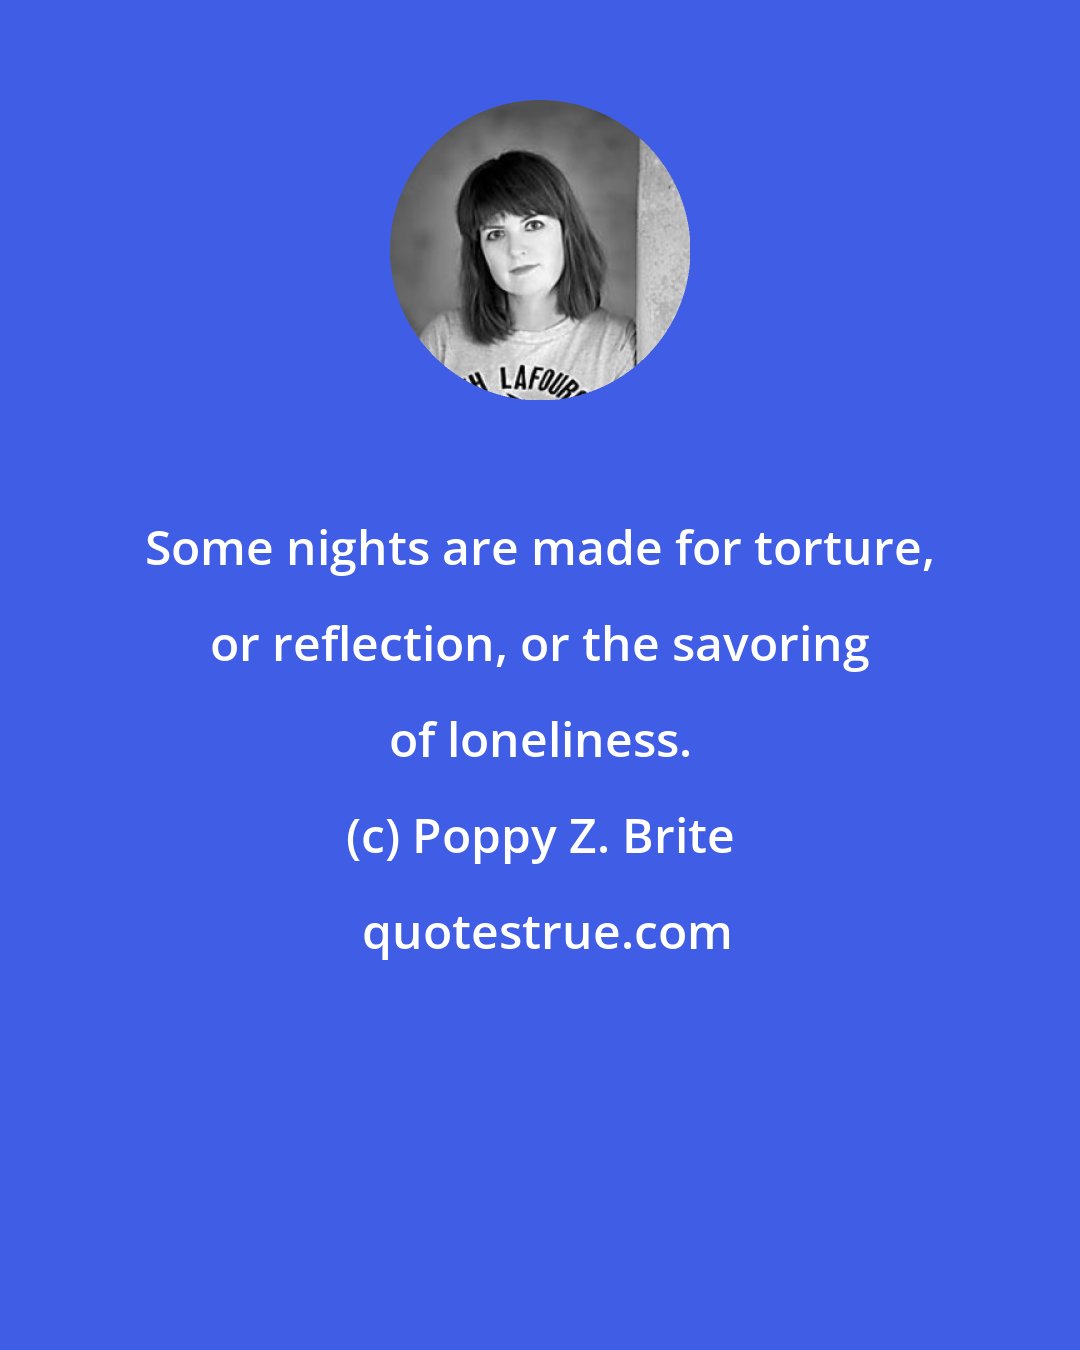 Poppy Z. Brite: Some nights are made for torture, or reflection, or the savoring of loneliness.